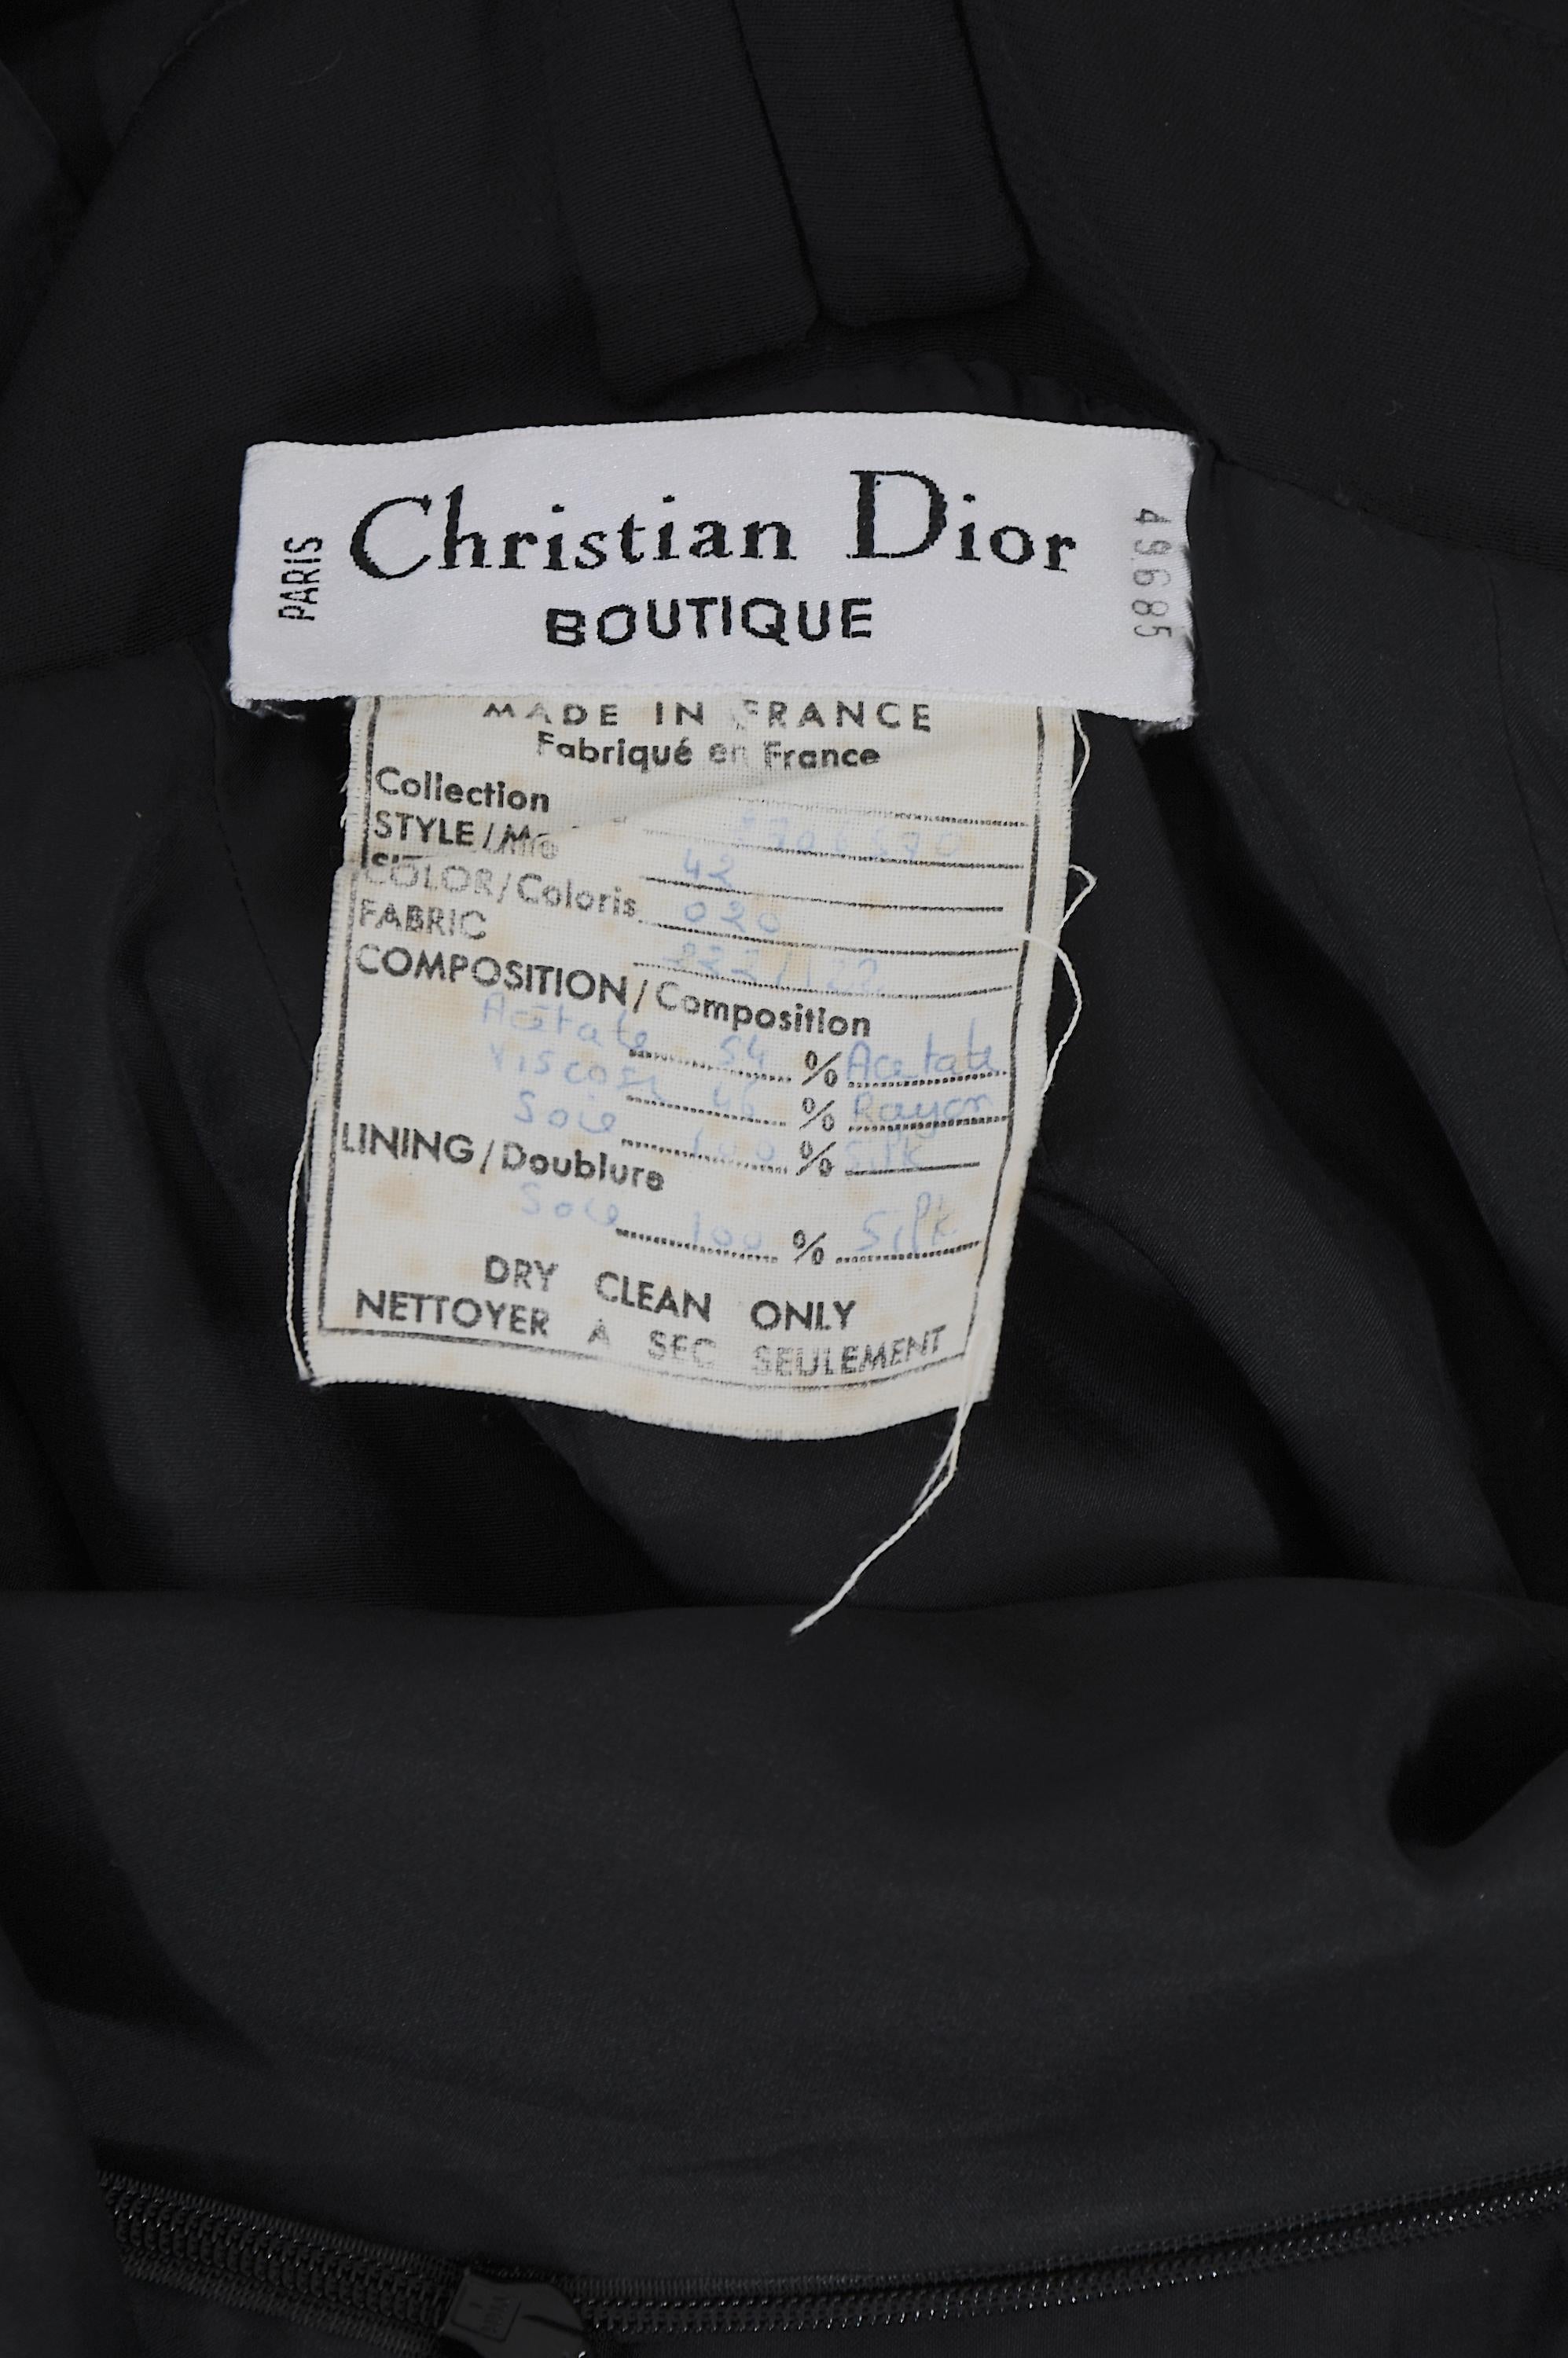 Christian Dior by Gianfranco Ferre S/S 1994 vintage black silk evening dress For Sale 11